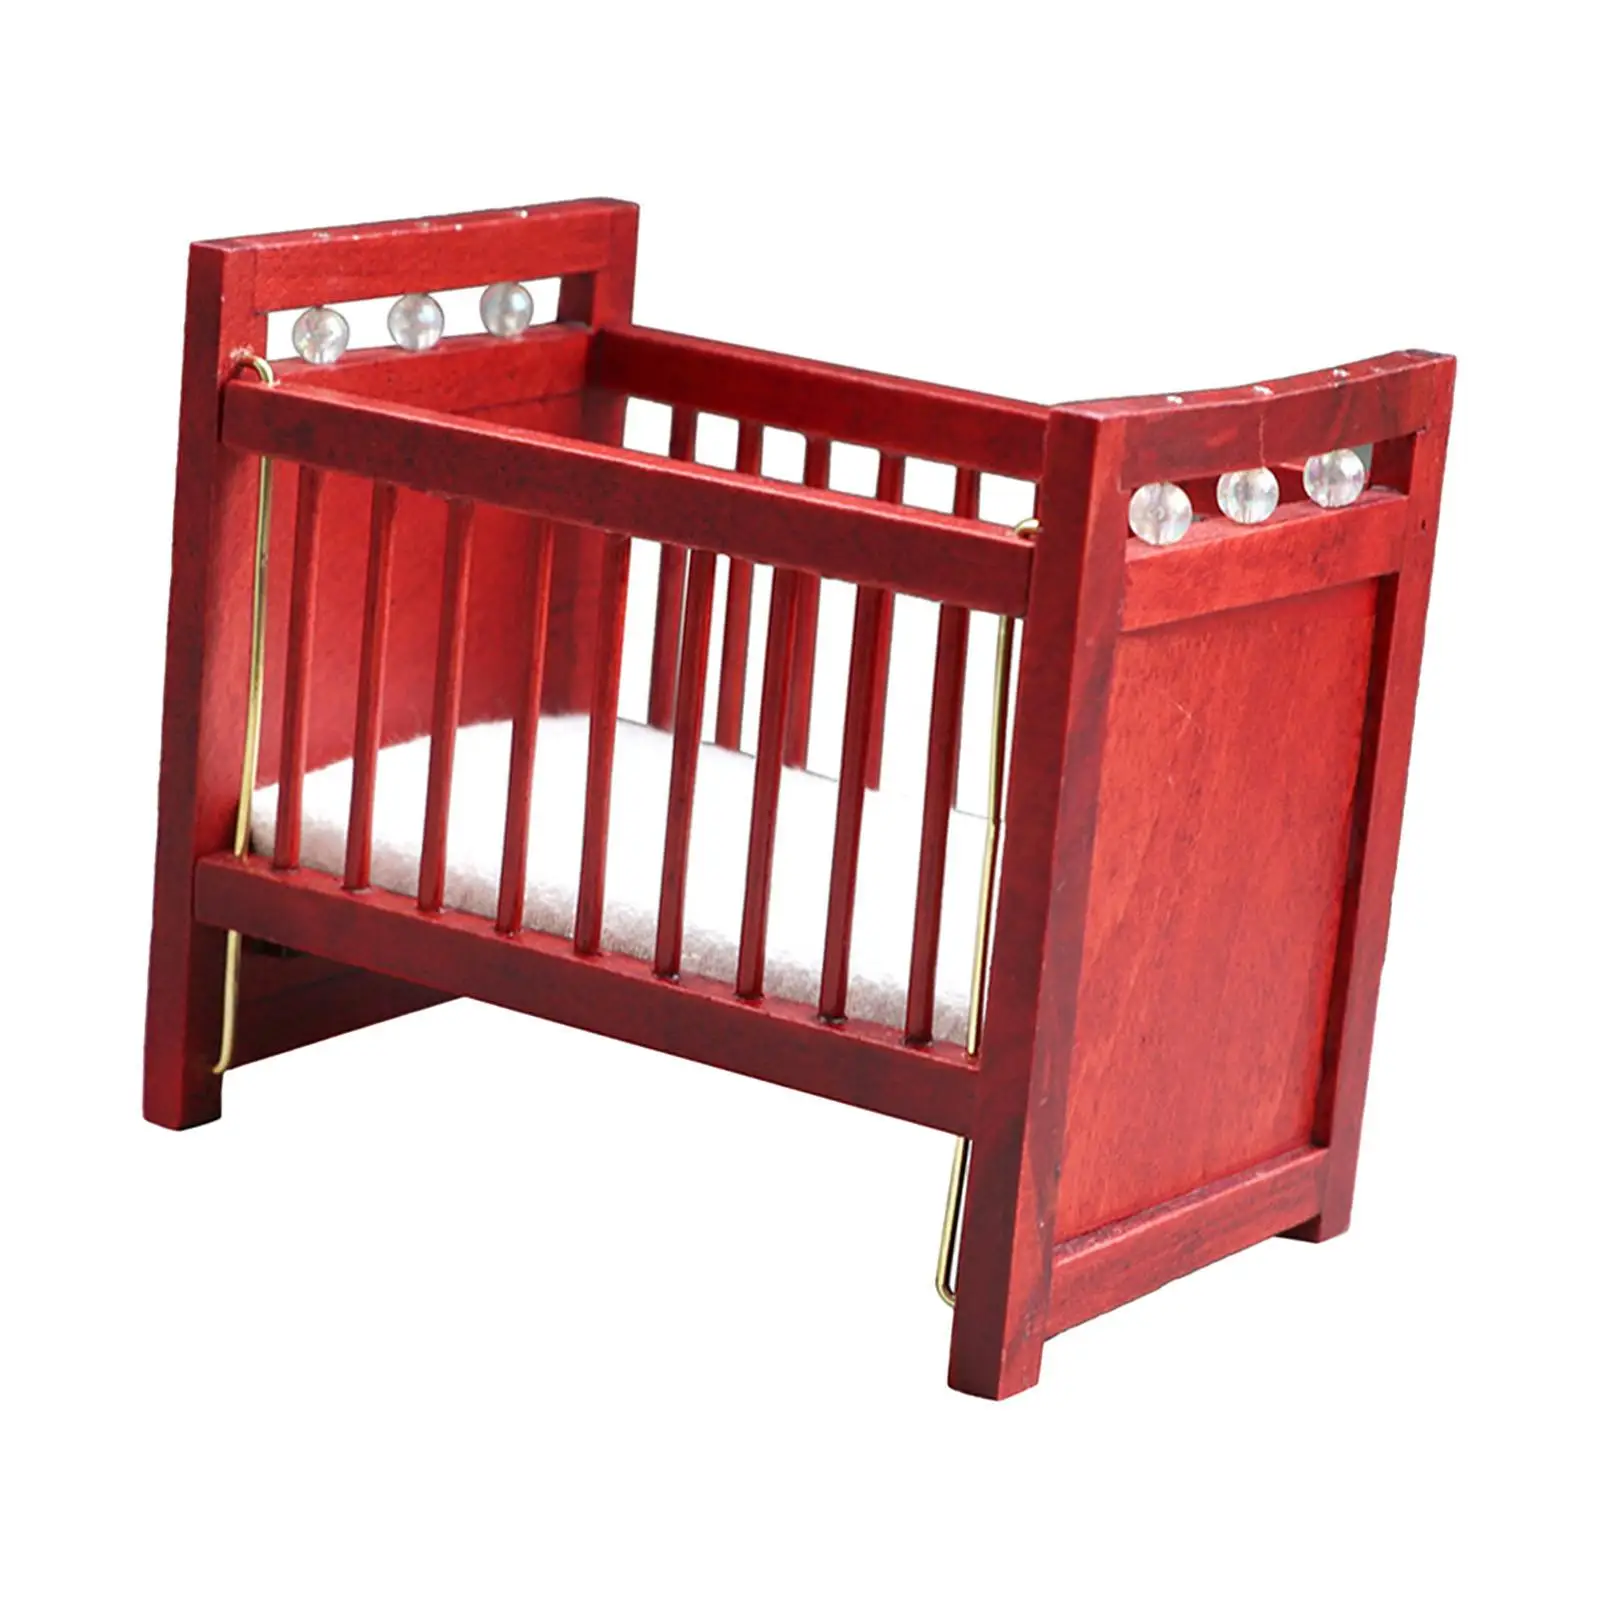 Miniature Dollhouse Bed Bedroom Scene 1:12 Photo Props Red Crib Decoration